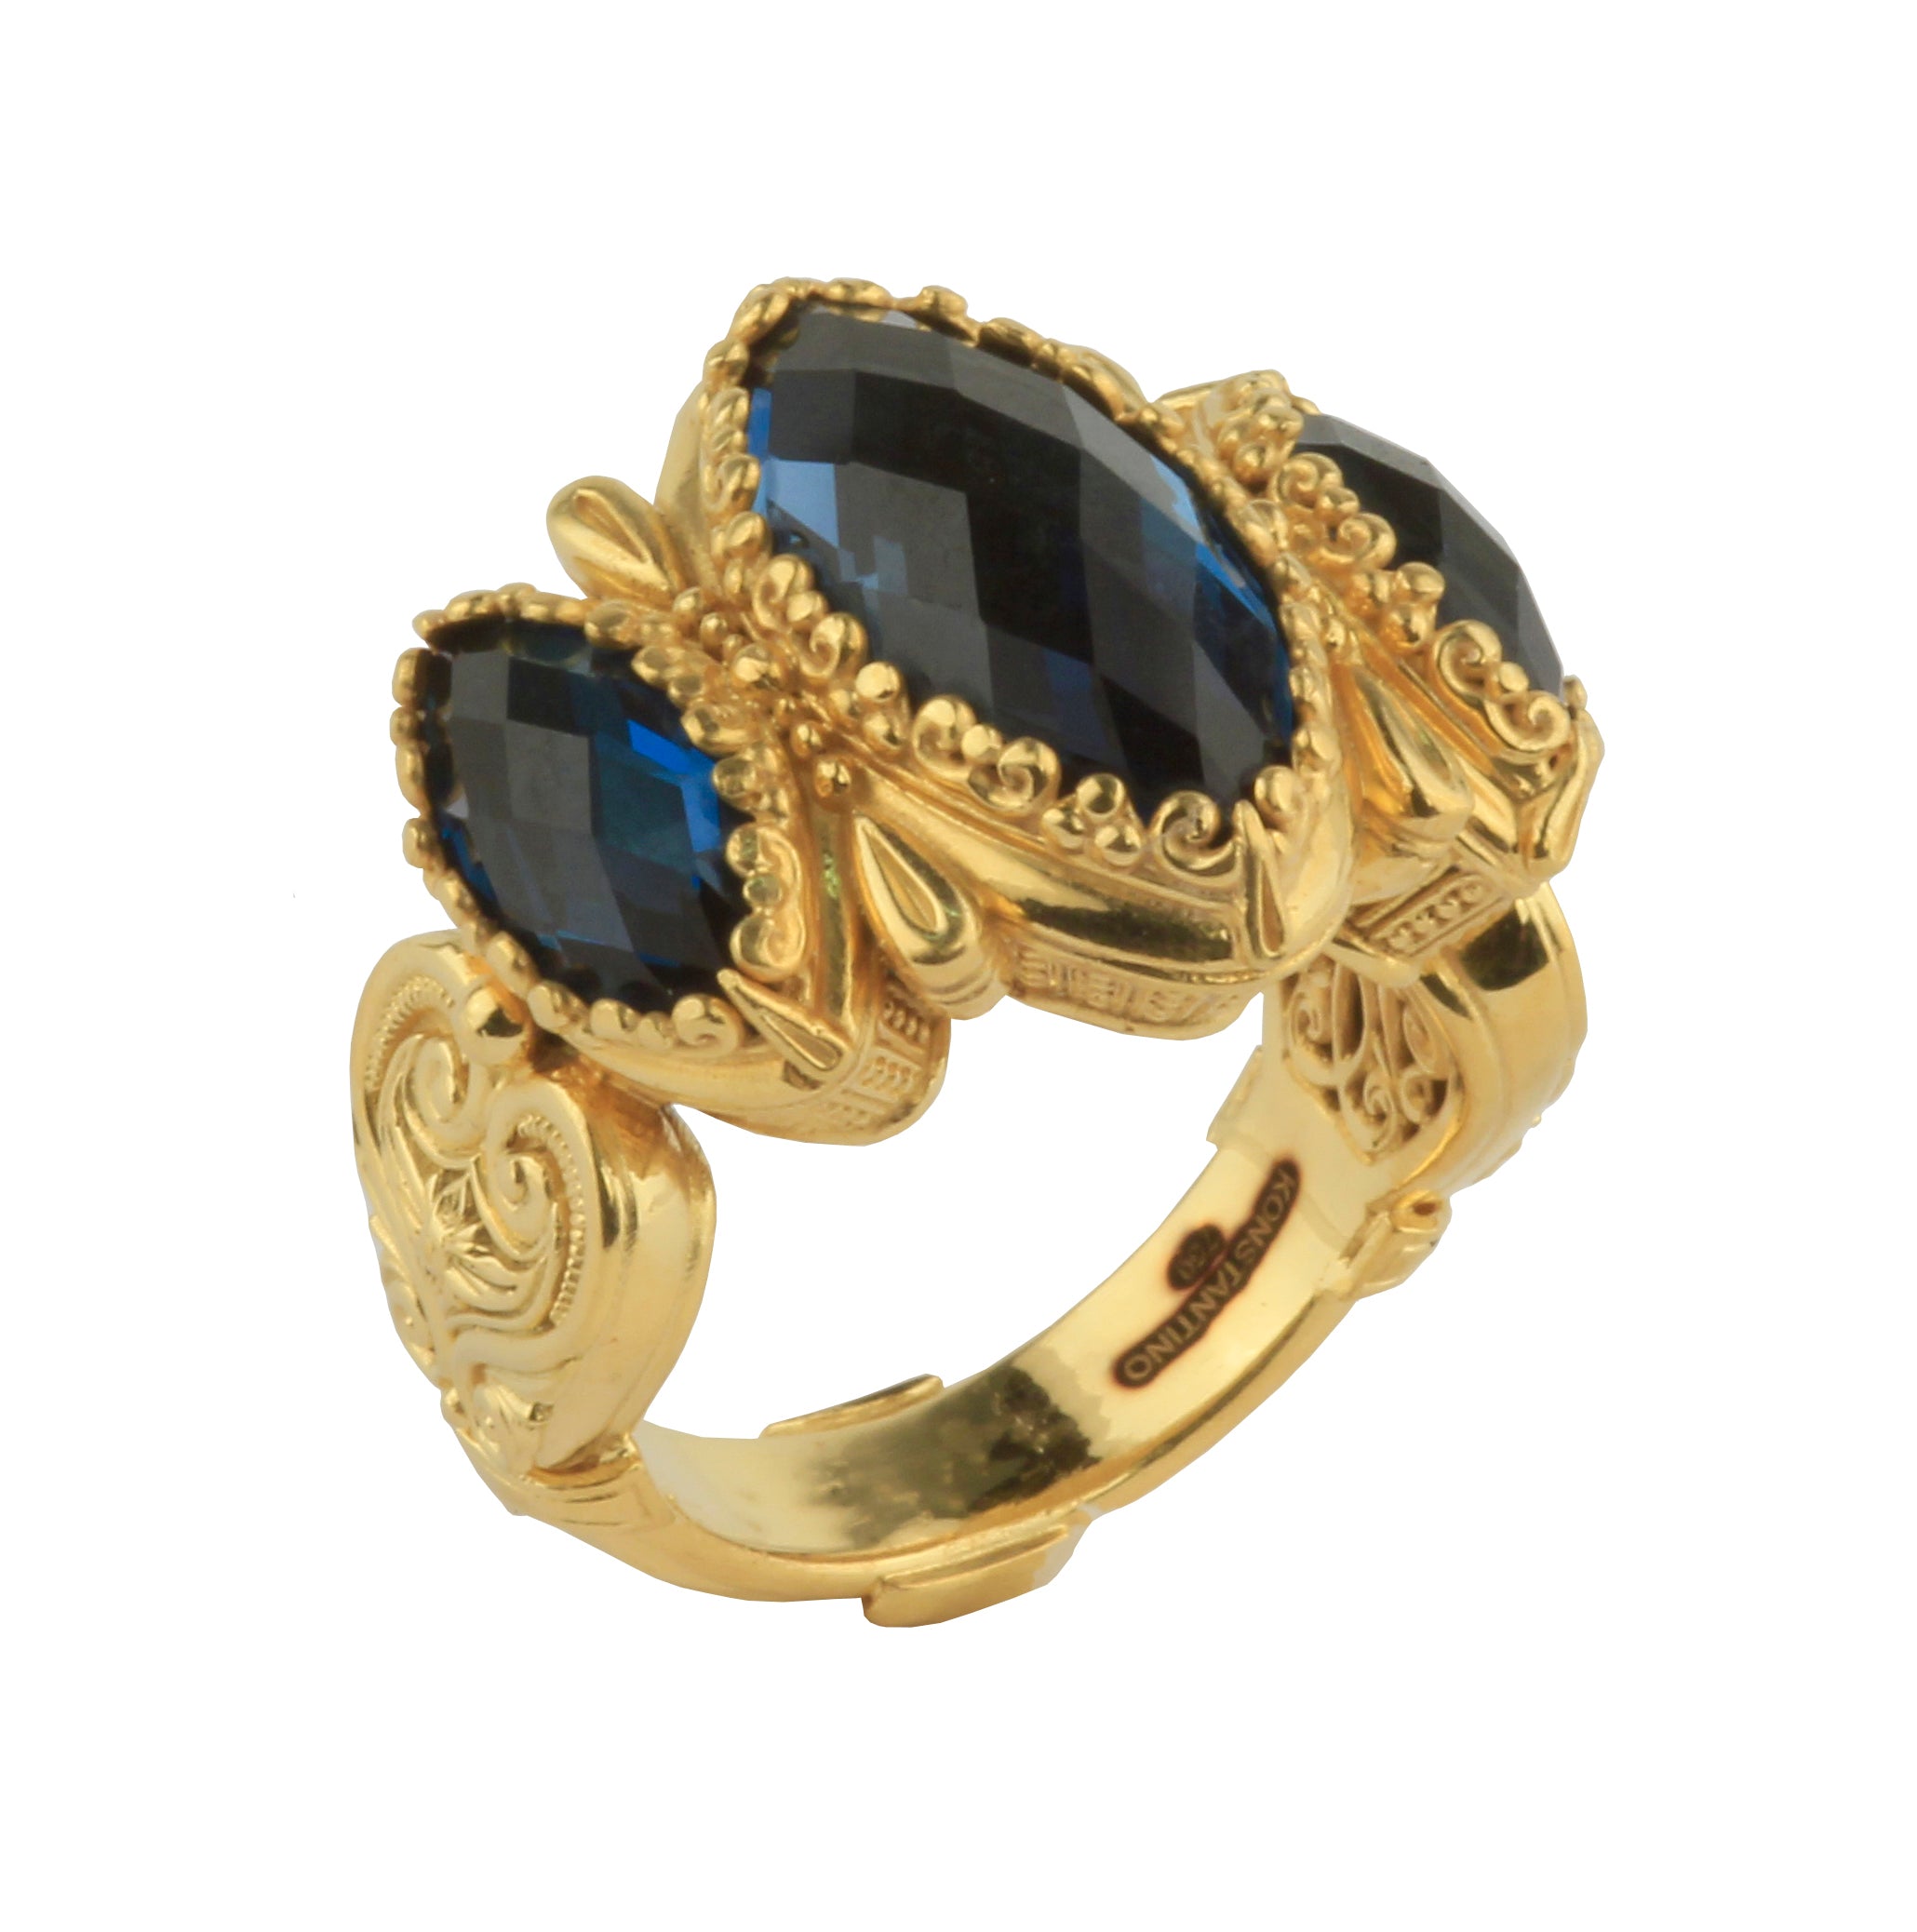 KONSTANTINO 18KT GOLD (12.4GR +/-)  LONDON BLUE TOPAZ (12.7CT +/-) RING FROM THE FLAMENCO GOLD  COLL